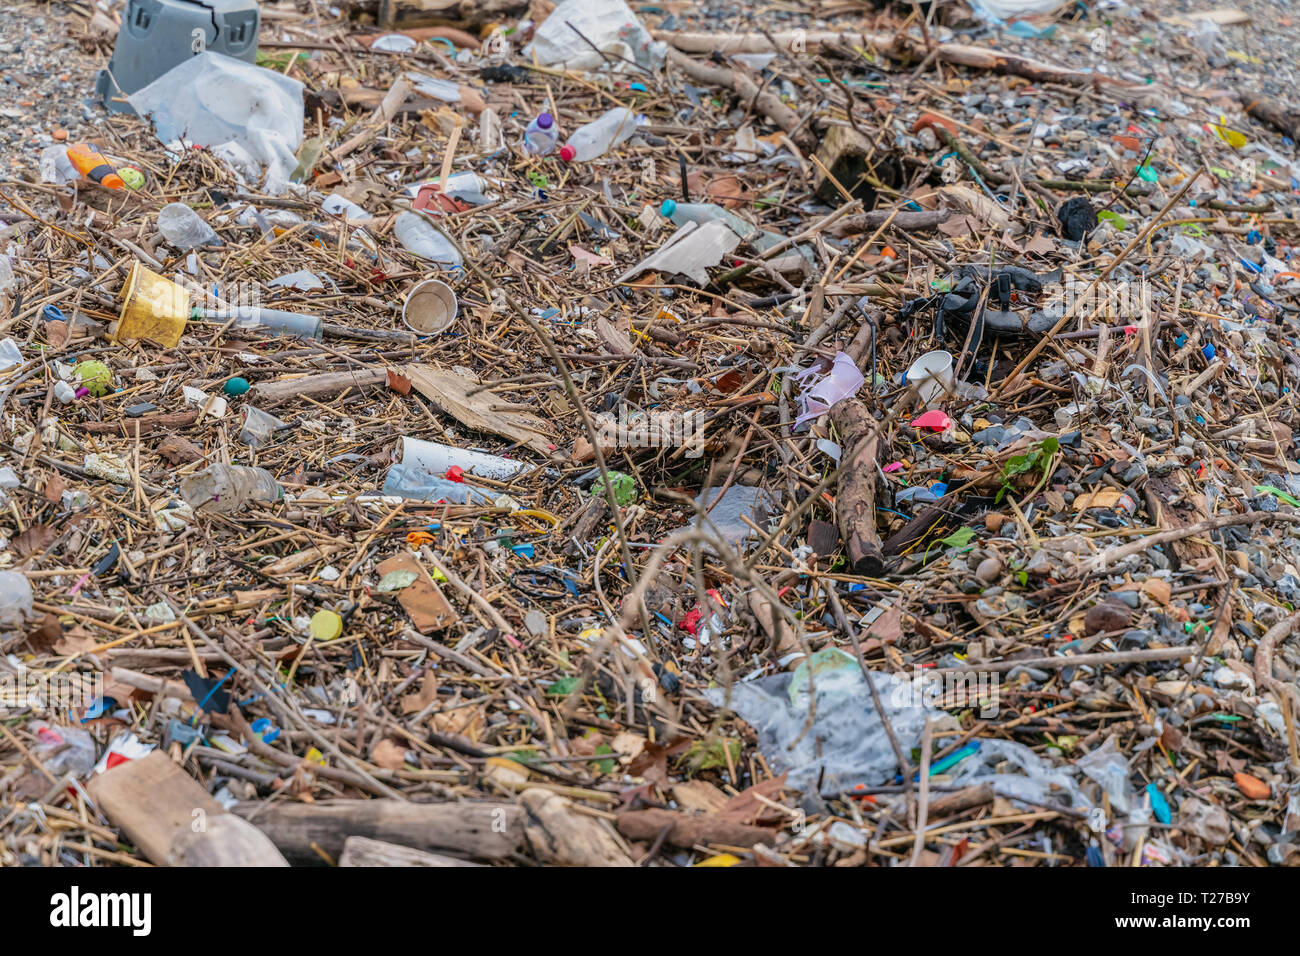 Environmental pollution found on the beach. The accumulation of plastic objects in the Earth's environment adversely affects wildlife and humans. Stock Photo